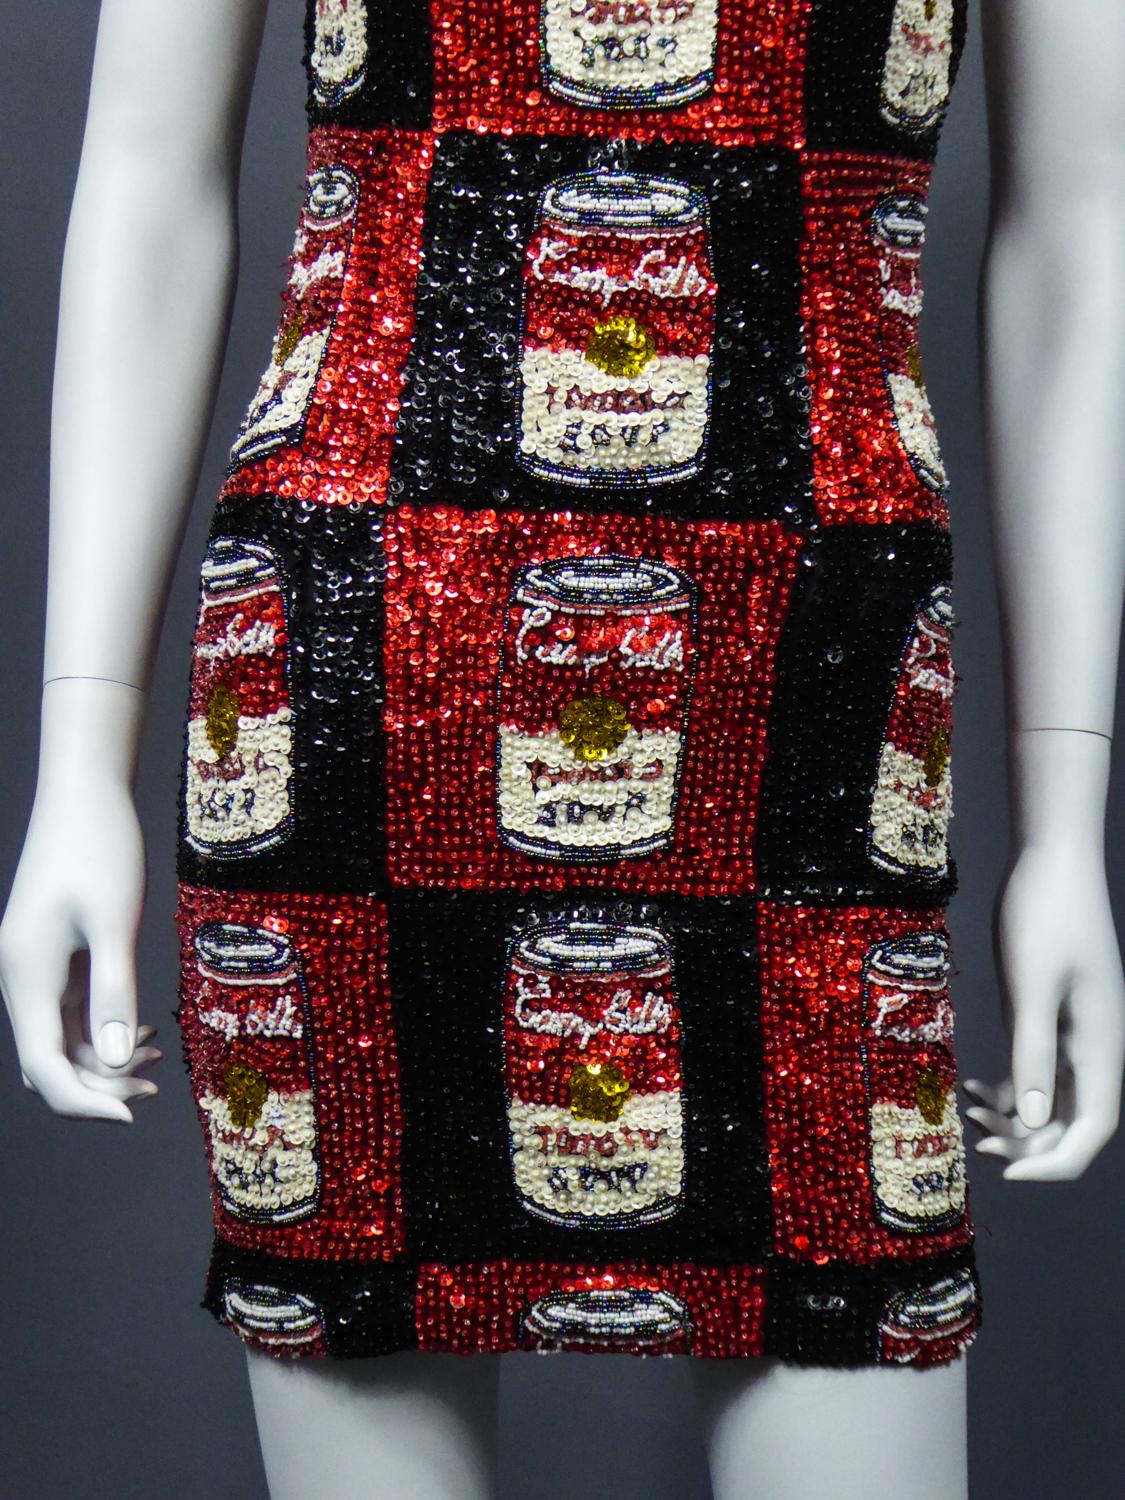 Black A Campbell's Soup Embroidered Mini Dress Andy Warhol Pink Soda Circa 1990